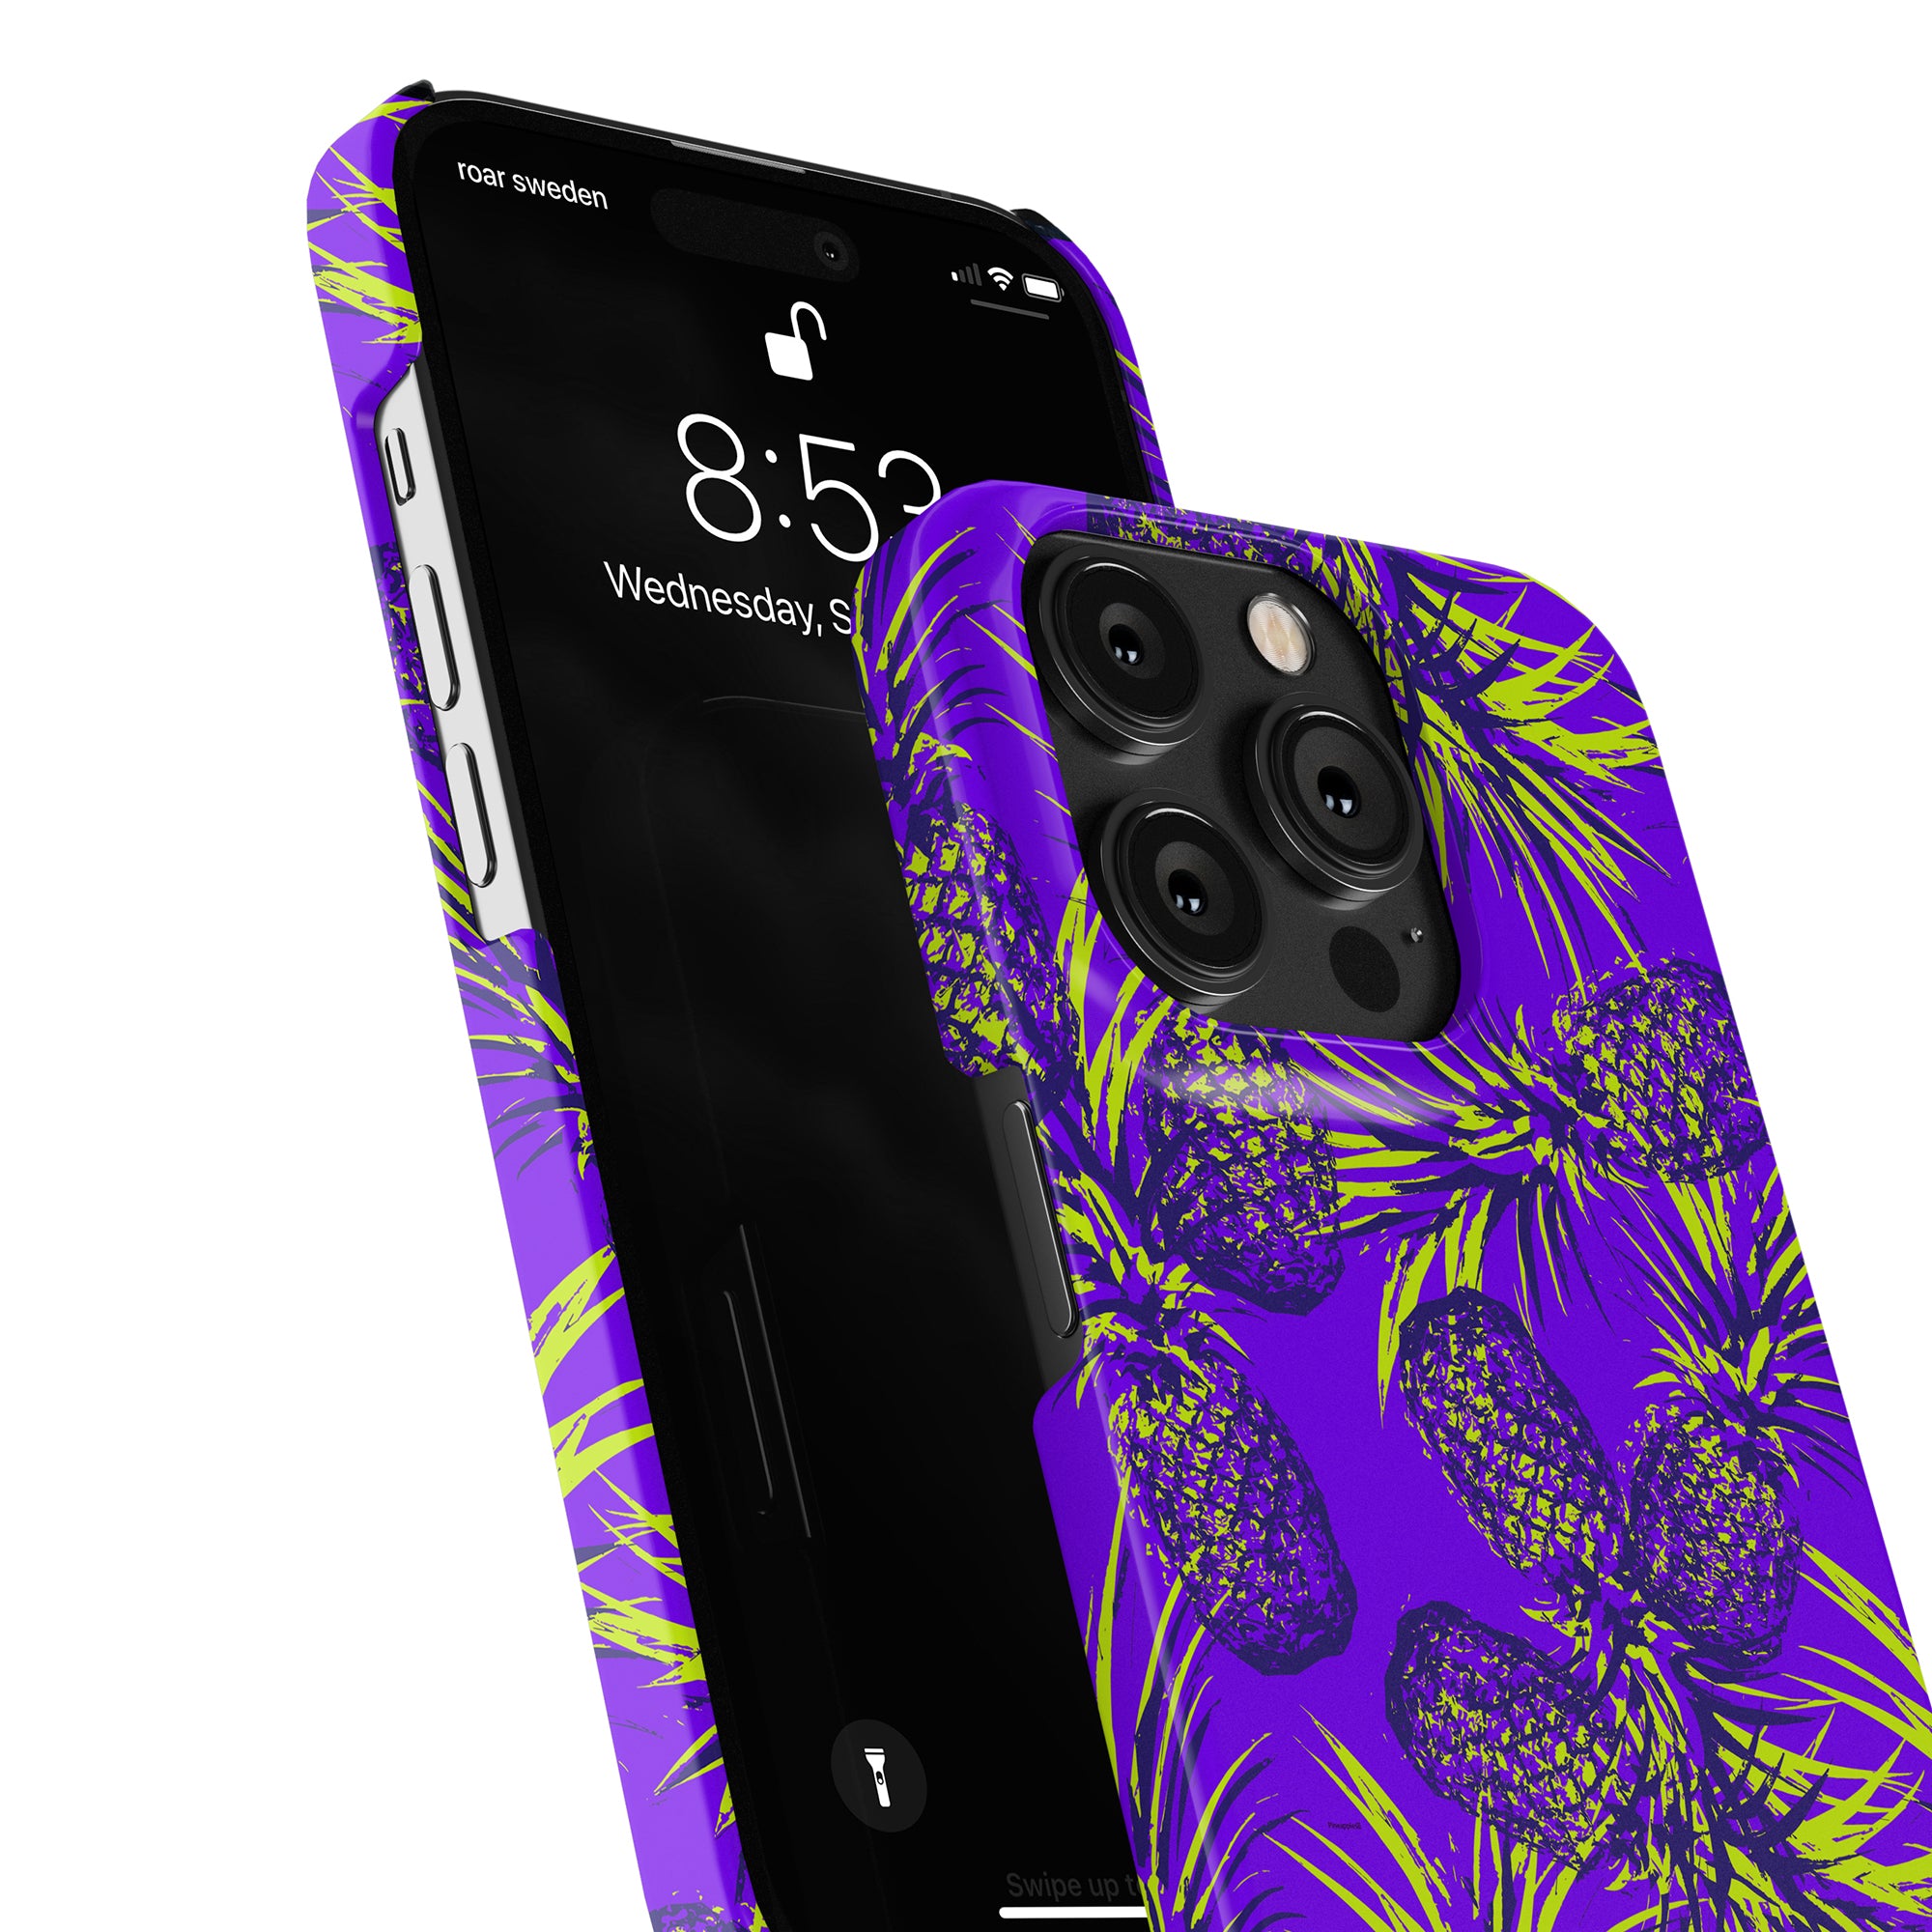 Two smartphones with matching purple and yellow Comosus - Slim cases displaying the time on their screens, perfect for enhancing your product description with SEO-friendly keywords.